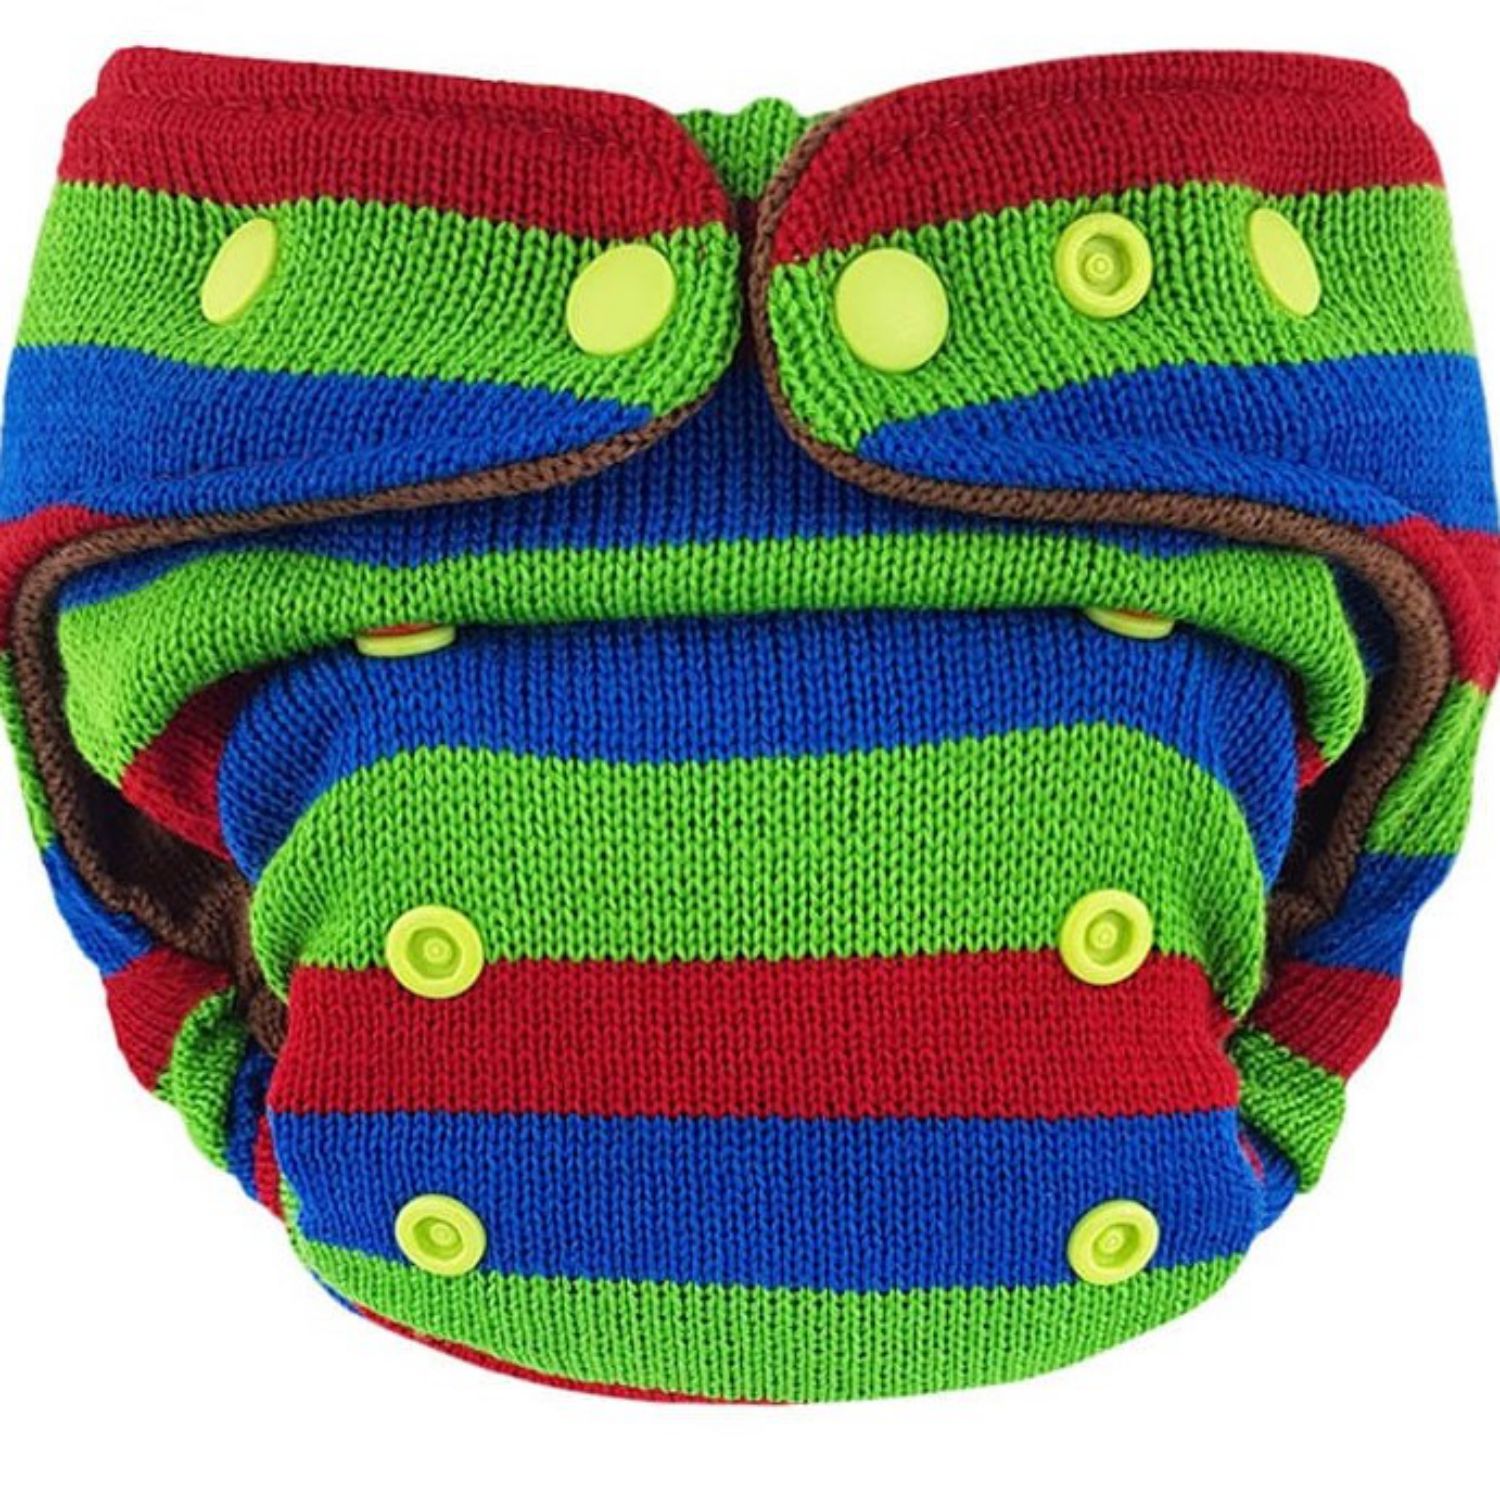 Magabi Knitted One Size Woolen Cover  Magabi Colour: Red/Green/Blue Stripes